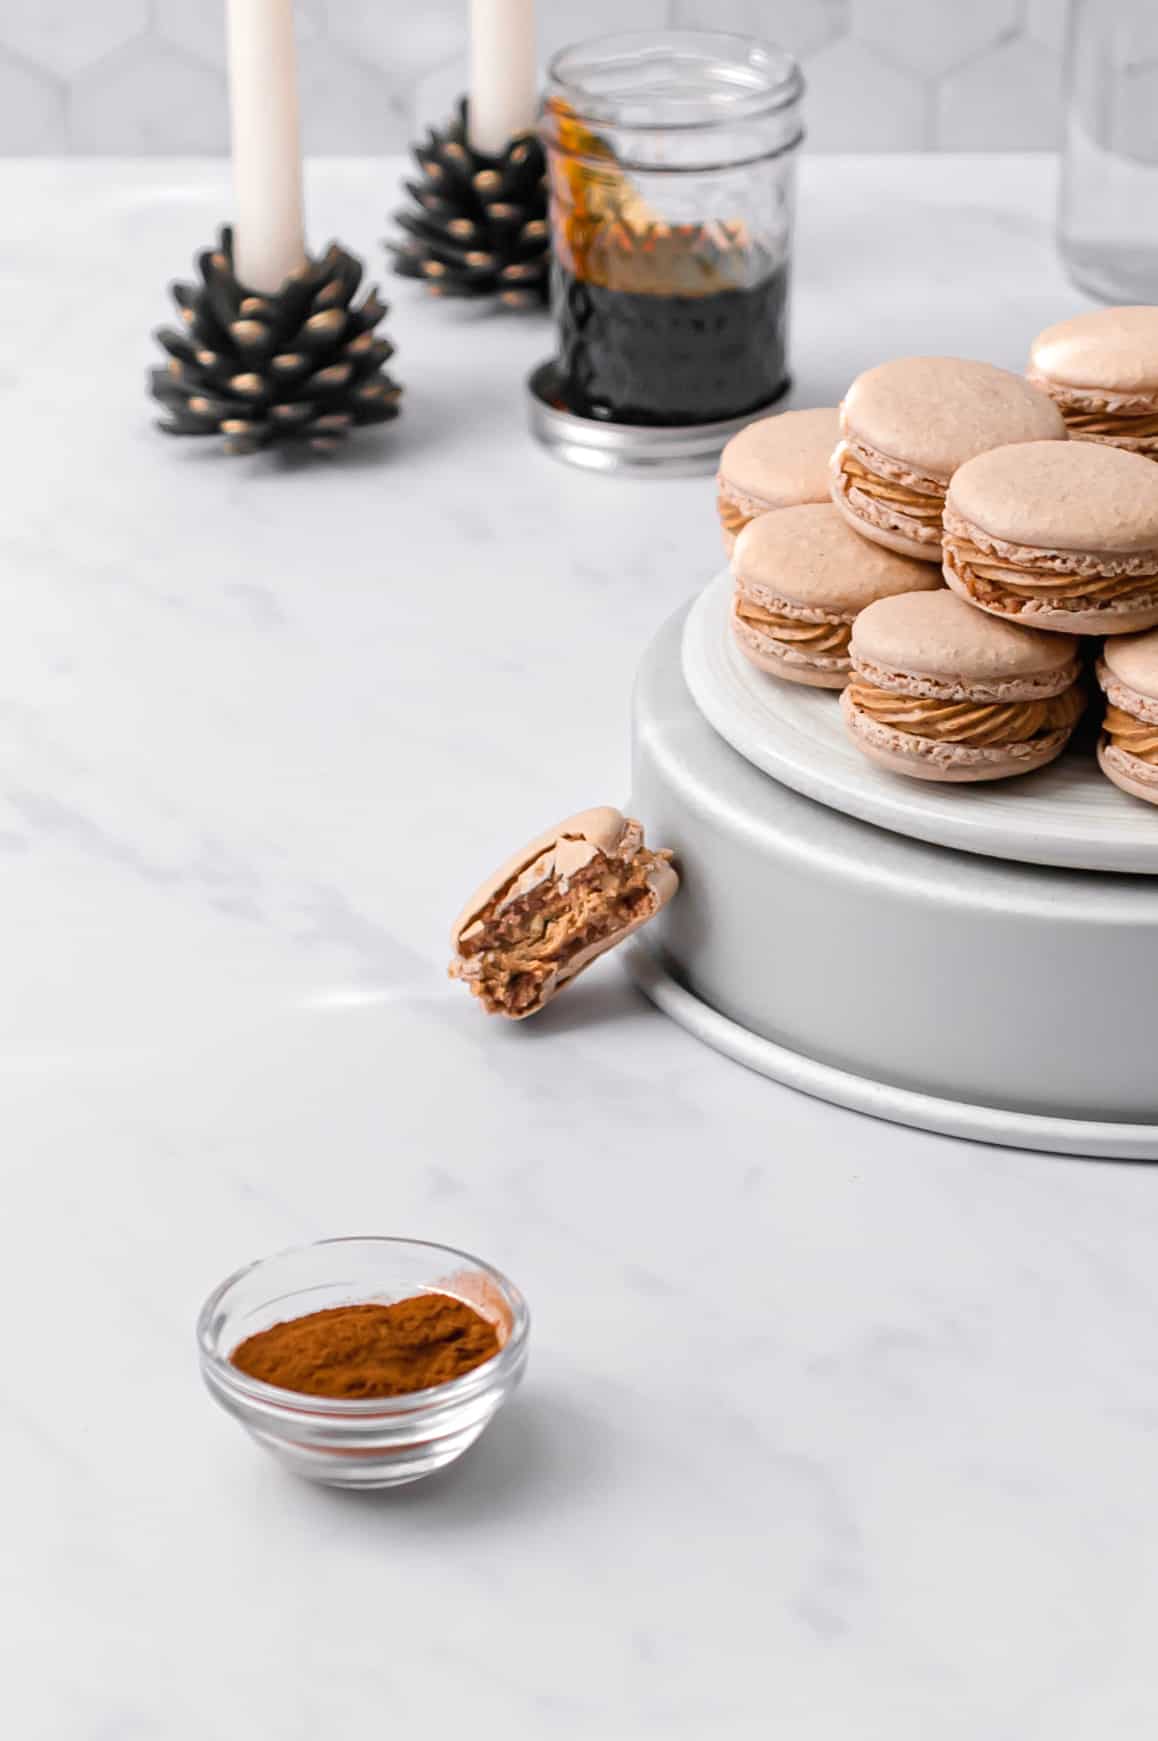 macarons stacked on top of overturned cake pan with candles and a jar of molasses in the background.